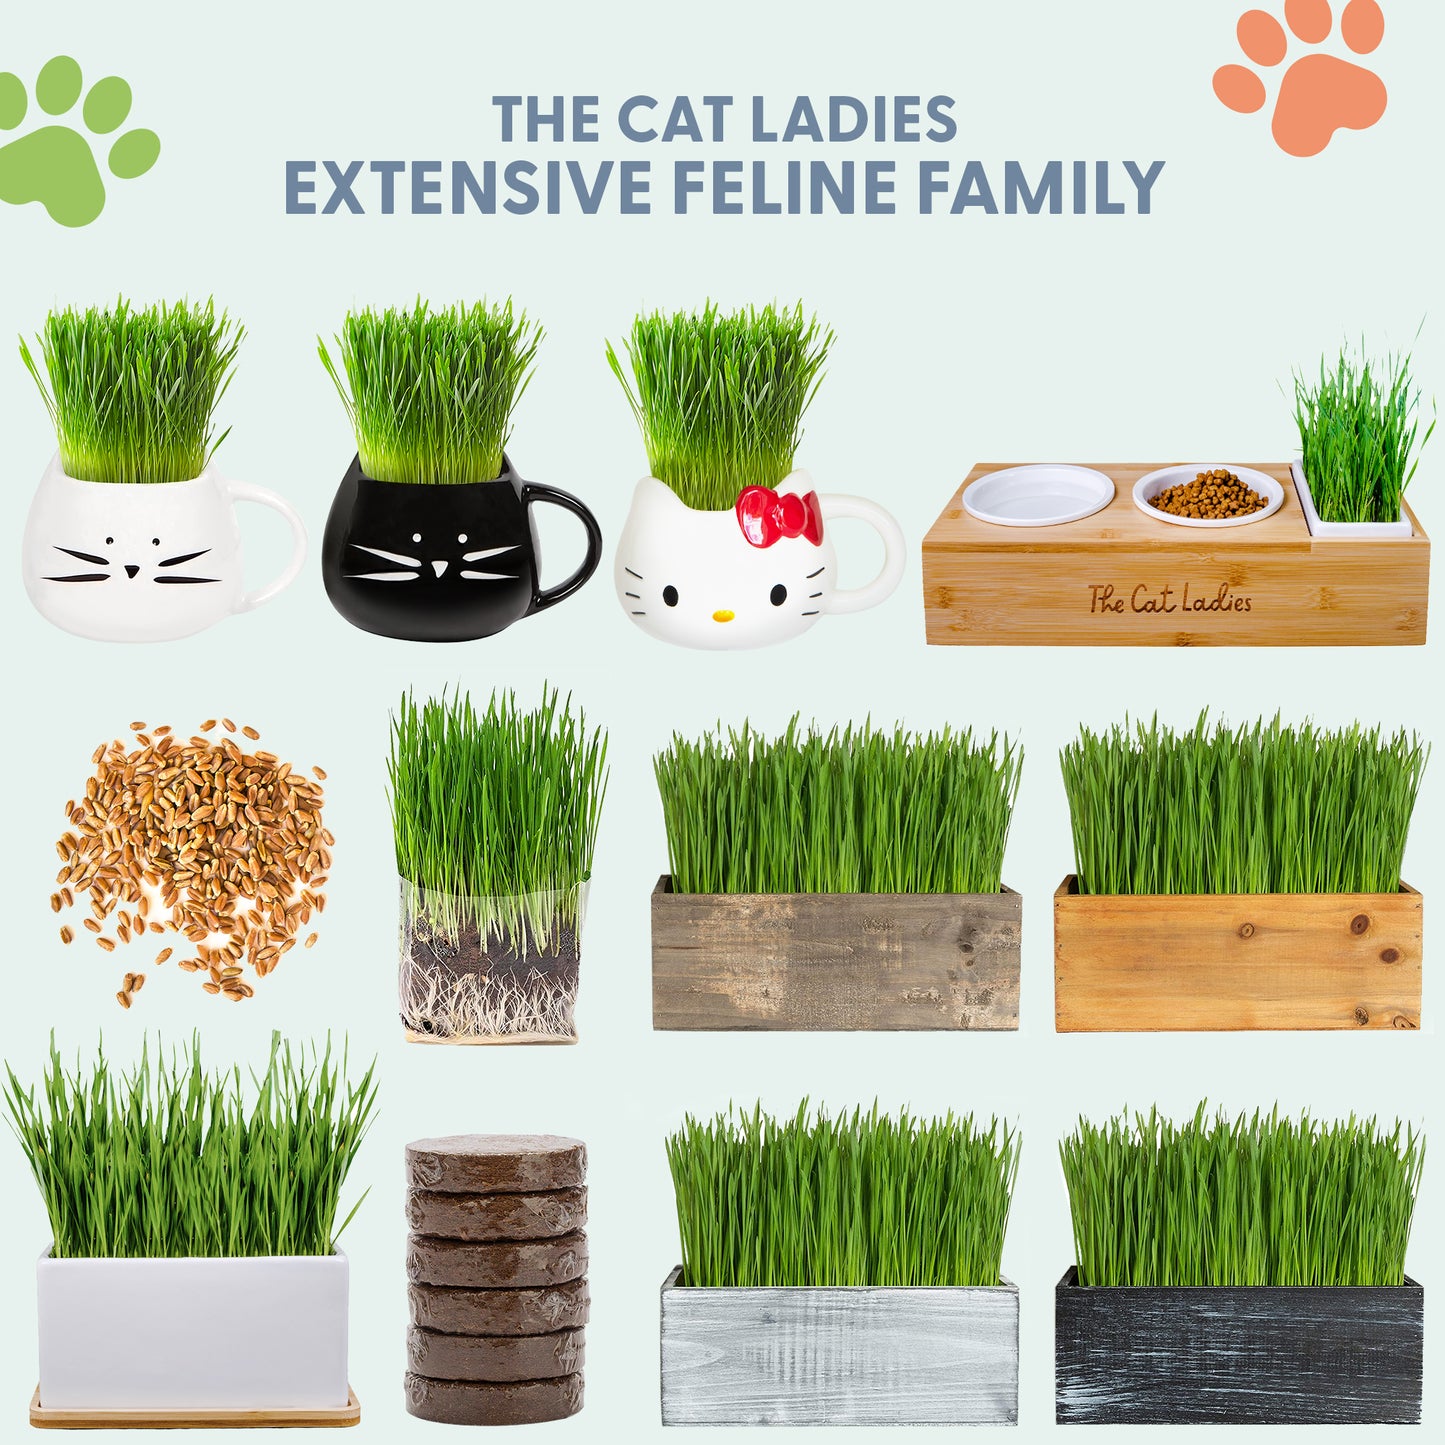 Cat Grass Growing Kit with Cat Grass Seed - Blue Cat Planter